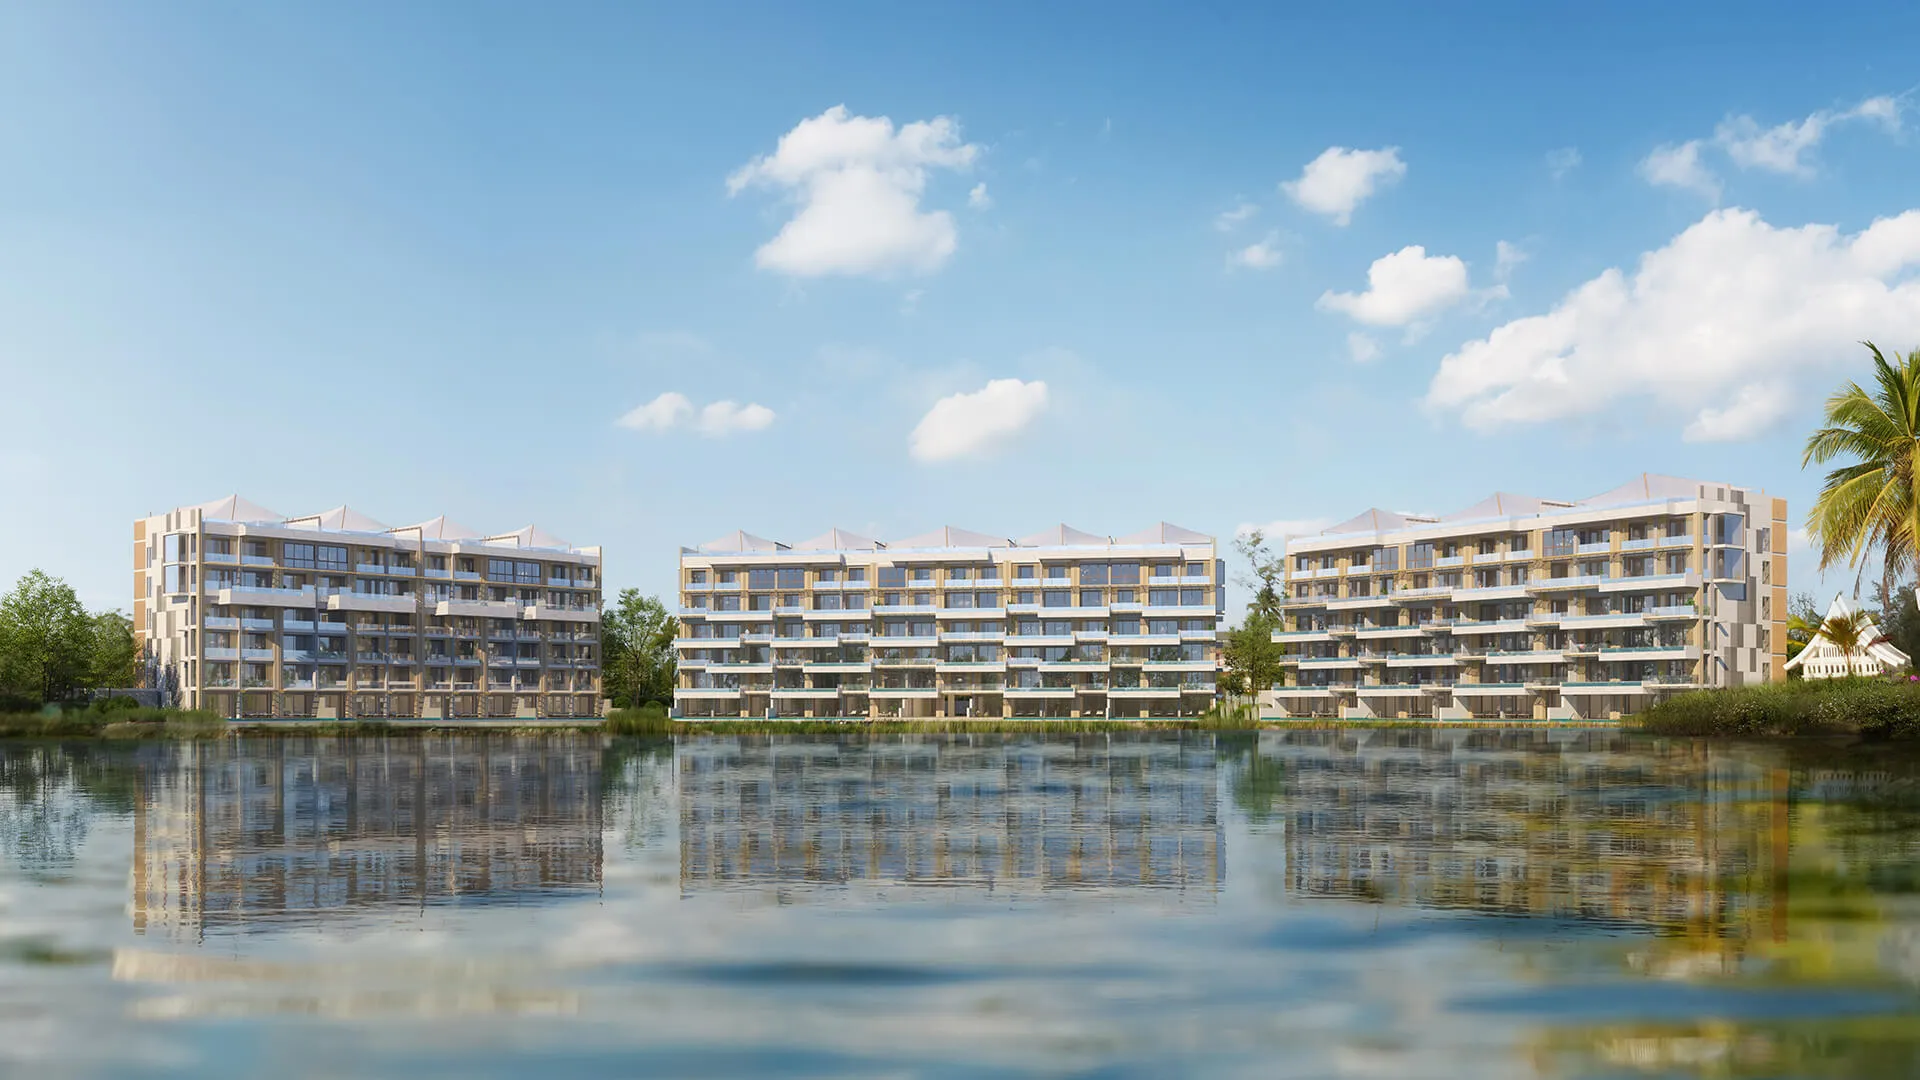 Symmetrical modern apartment buildings with large balconies stand beside a calm body of water, under a clear blue sky with clouds.